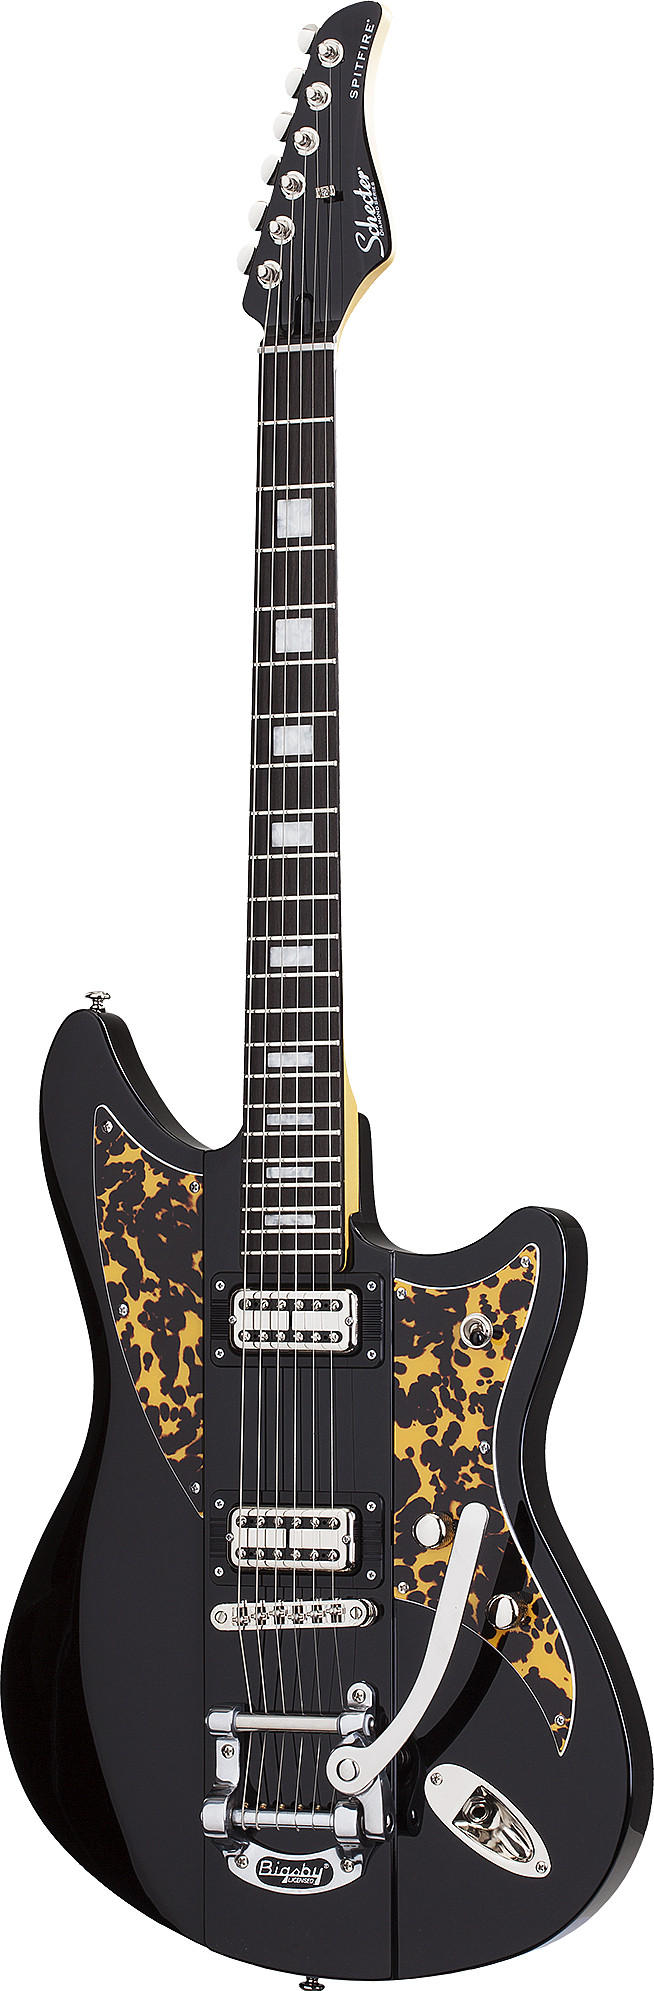 Spitfire by Schecter